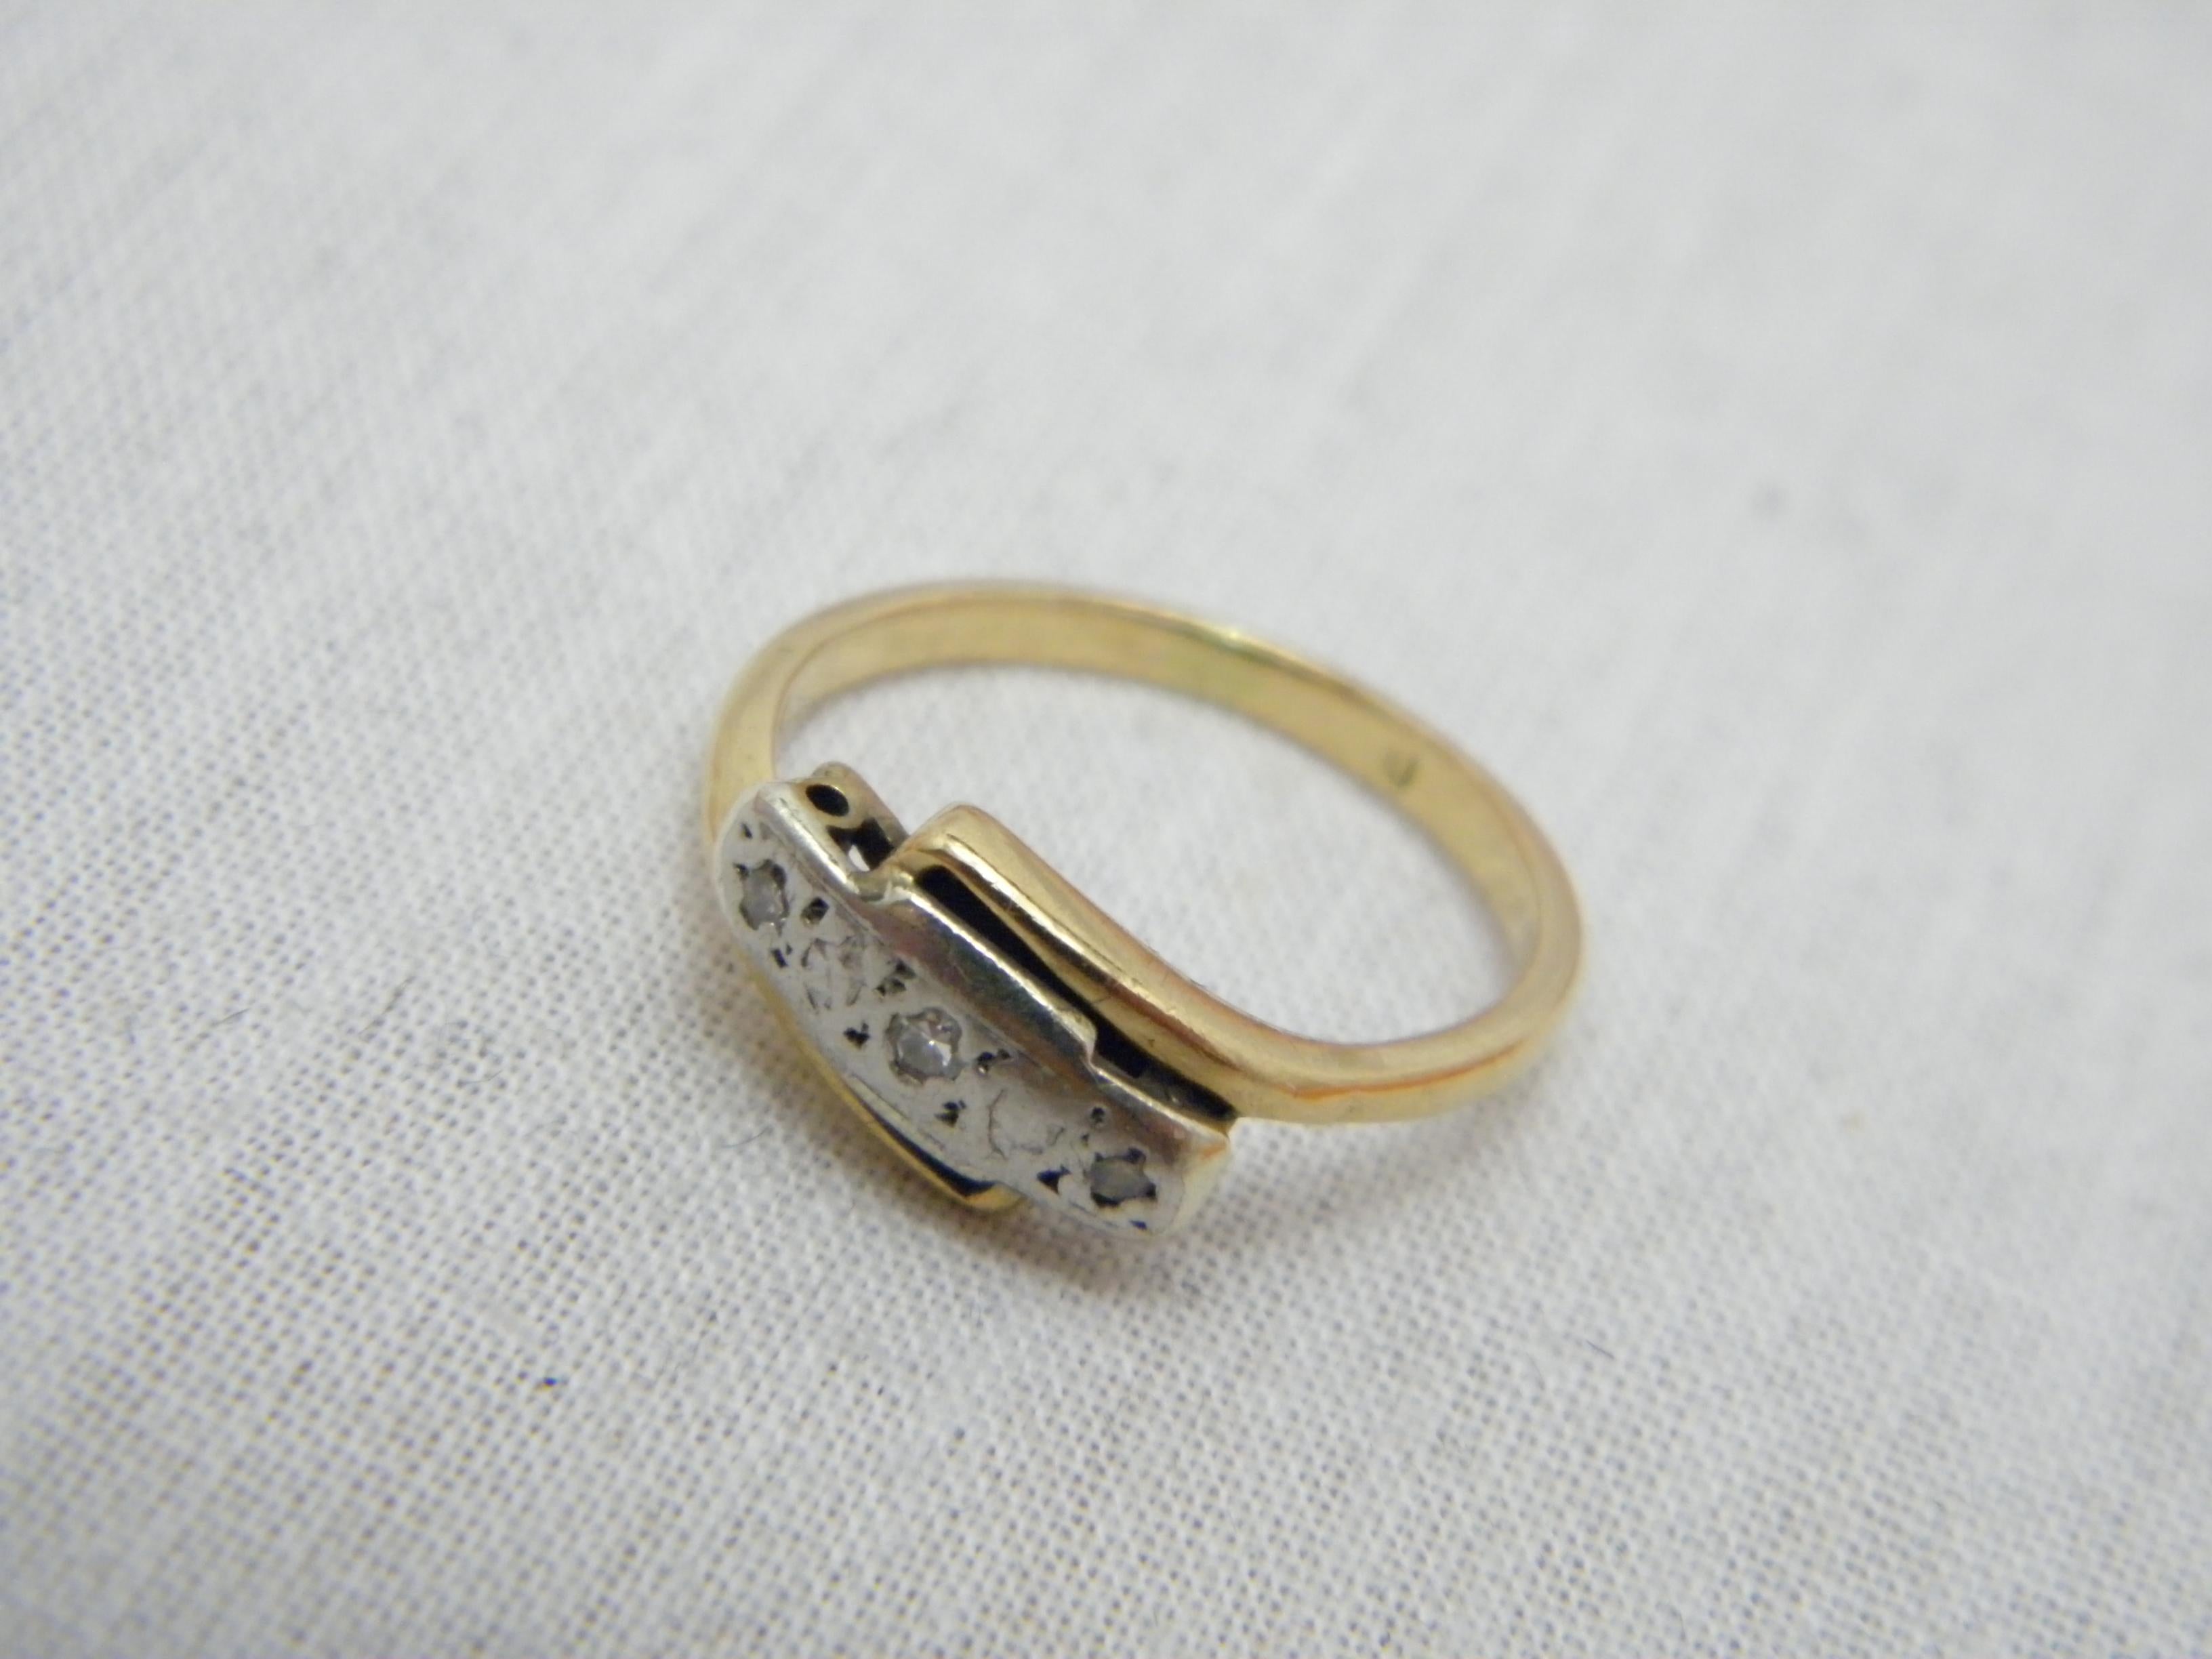 George III c1800 Antique 18ct Gold Platinum Diamond Trilogy Bypass Engagement Ring Size I.5